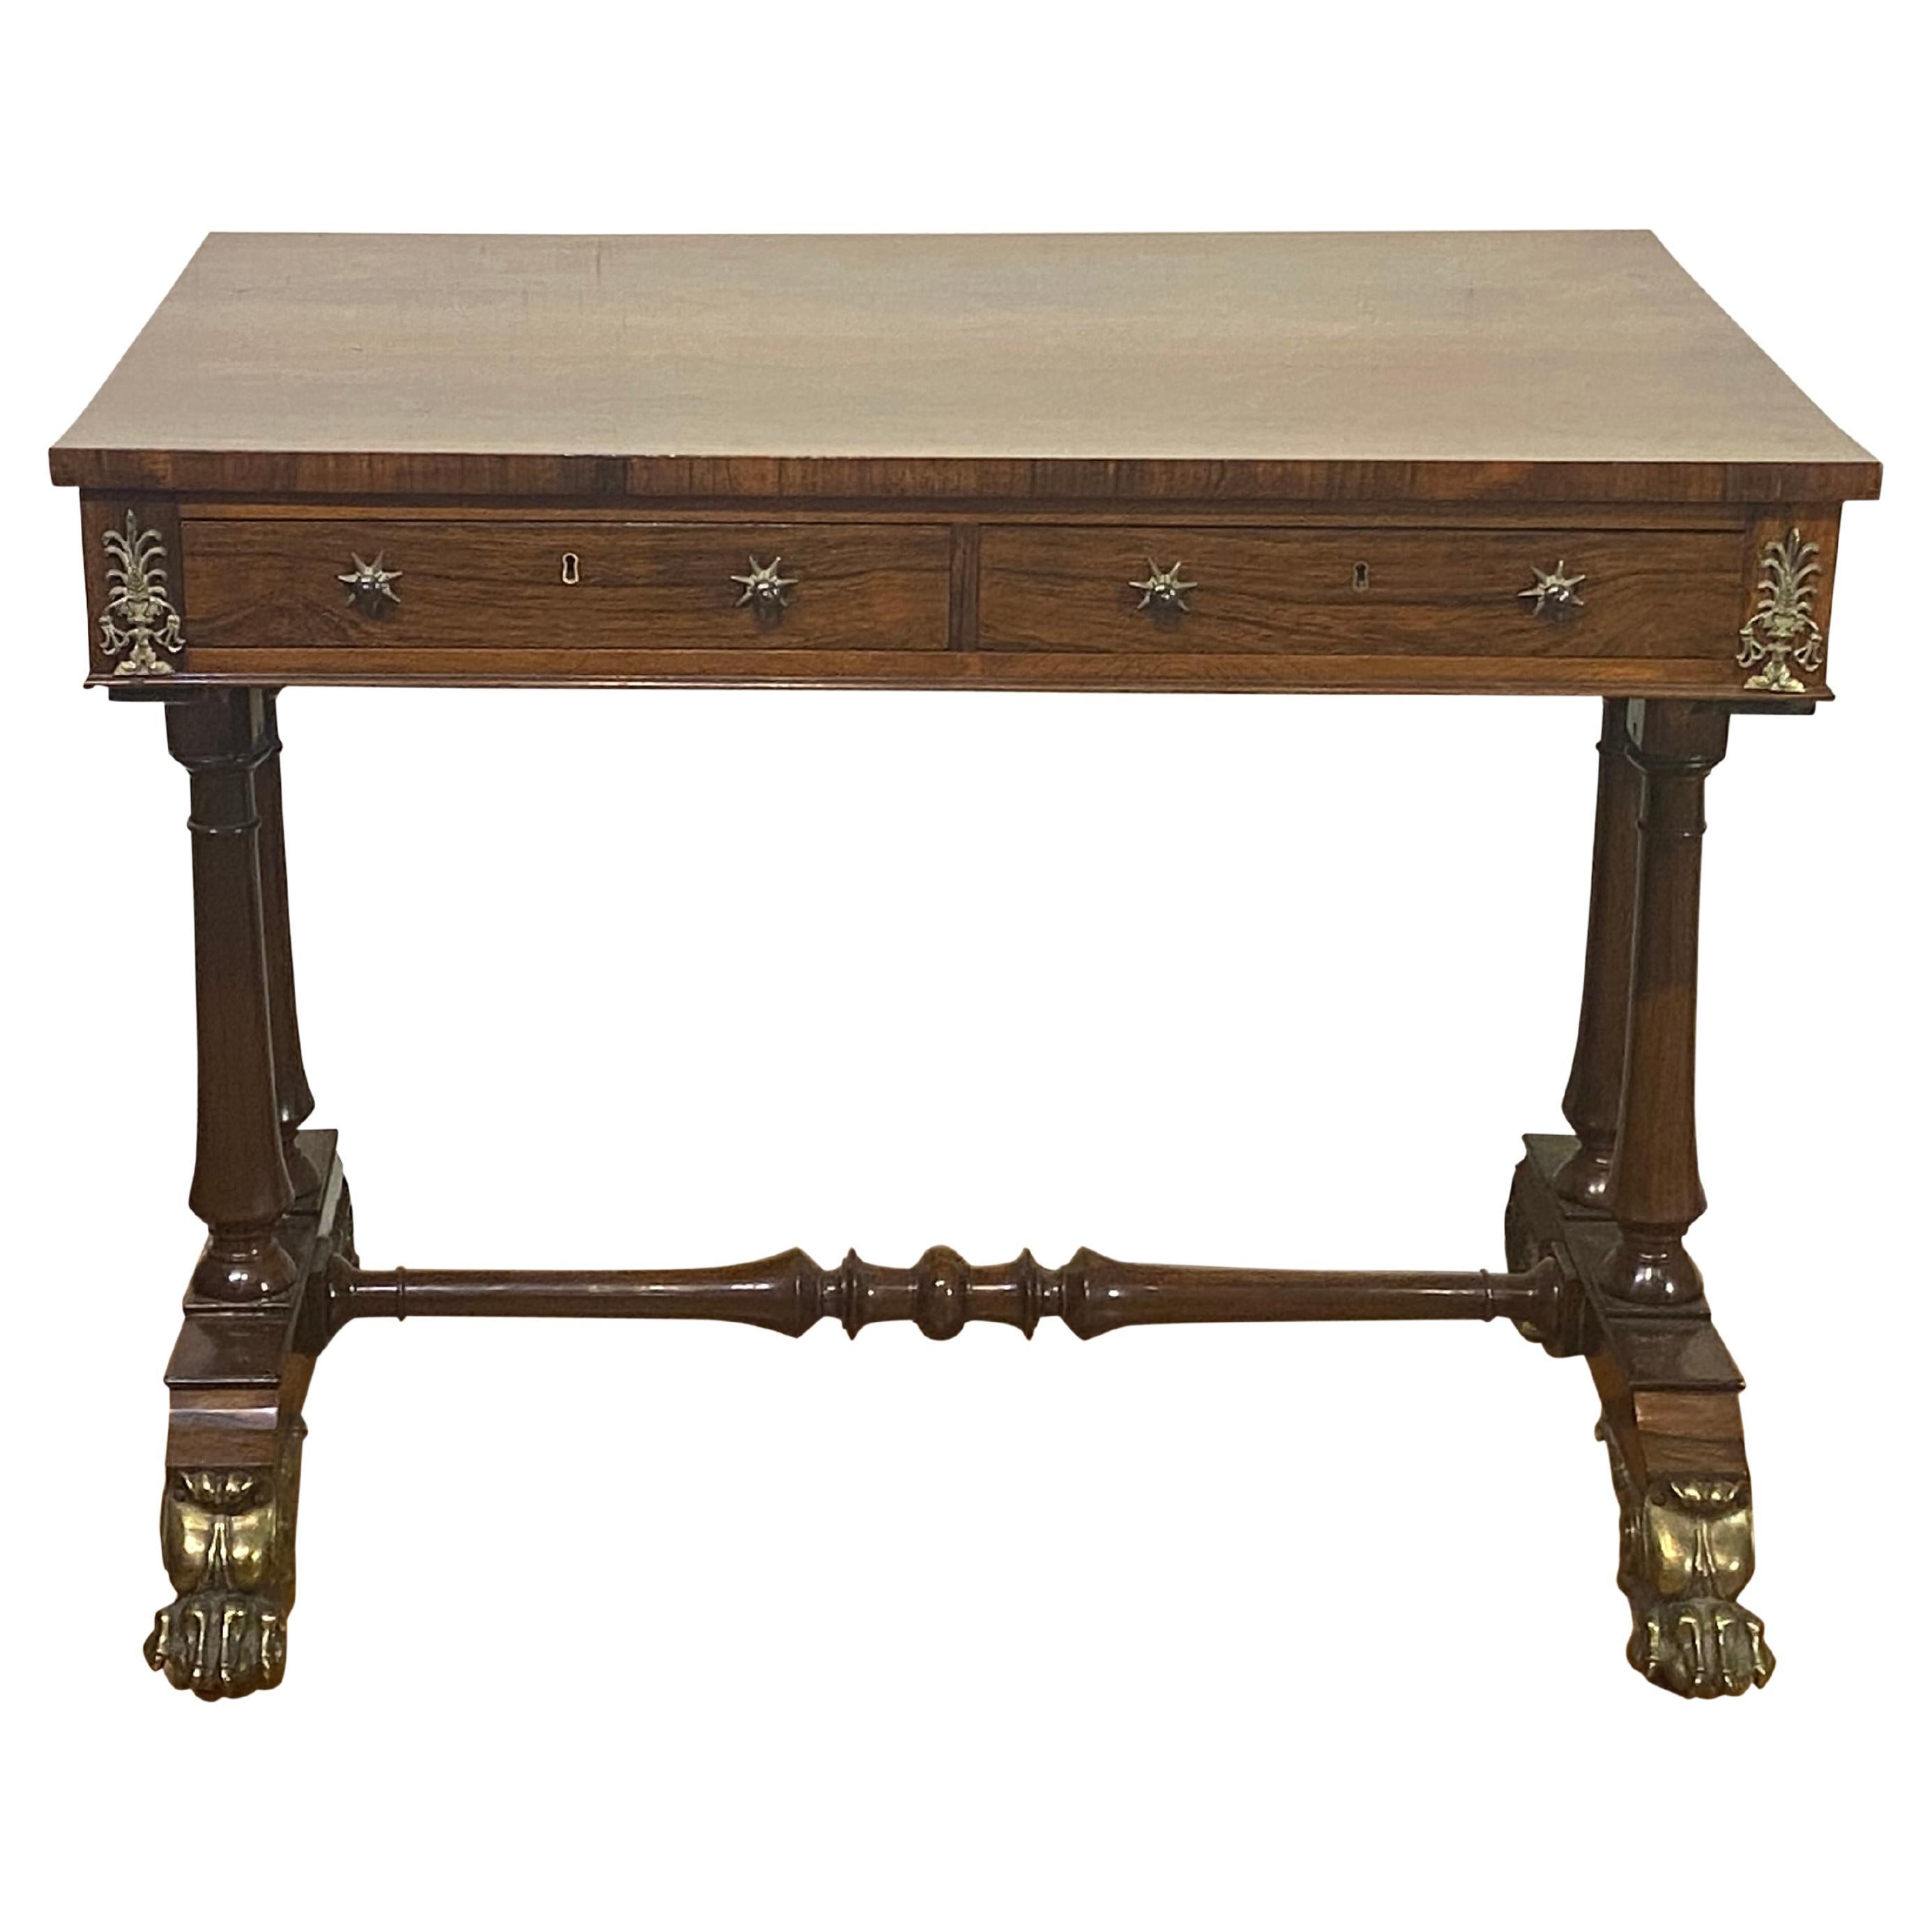 Regency Rosewood and Bronze Mounted Writing Table circa 1825